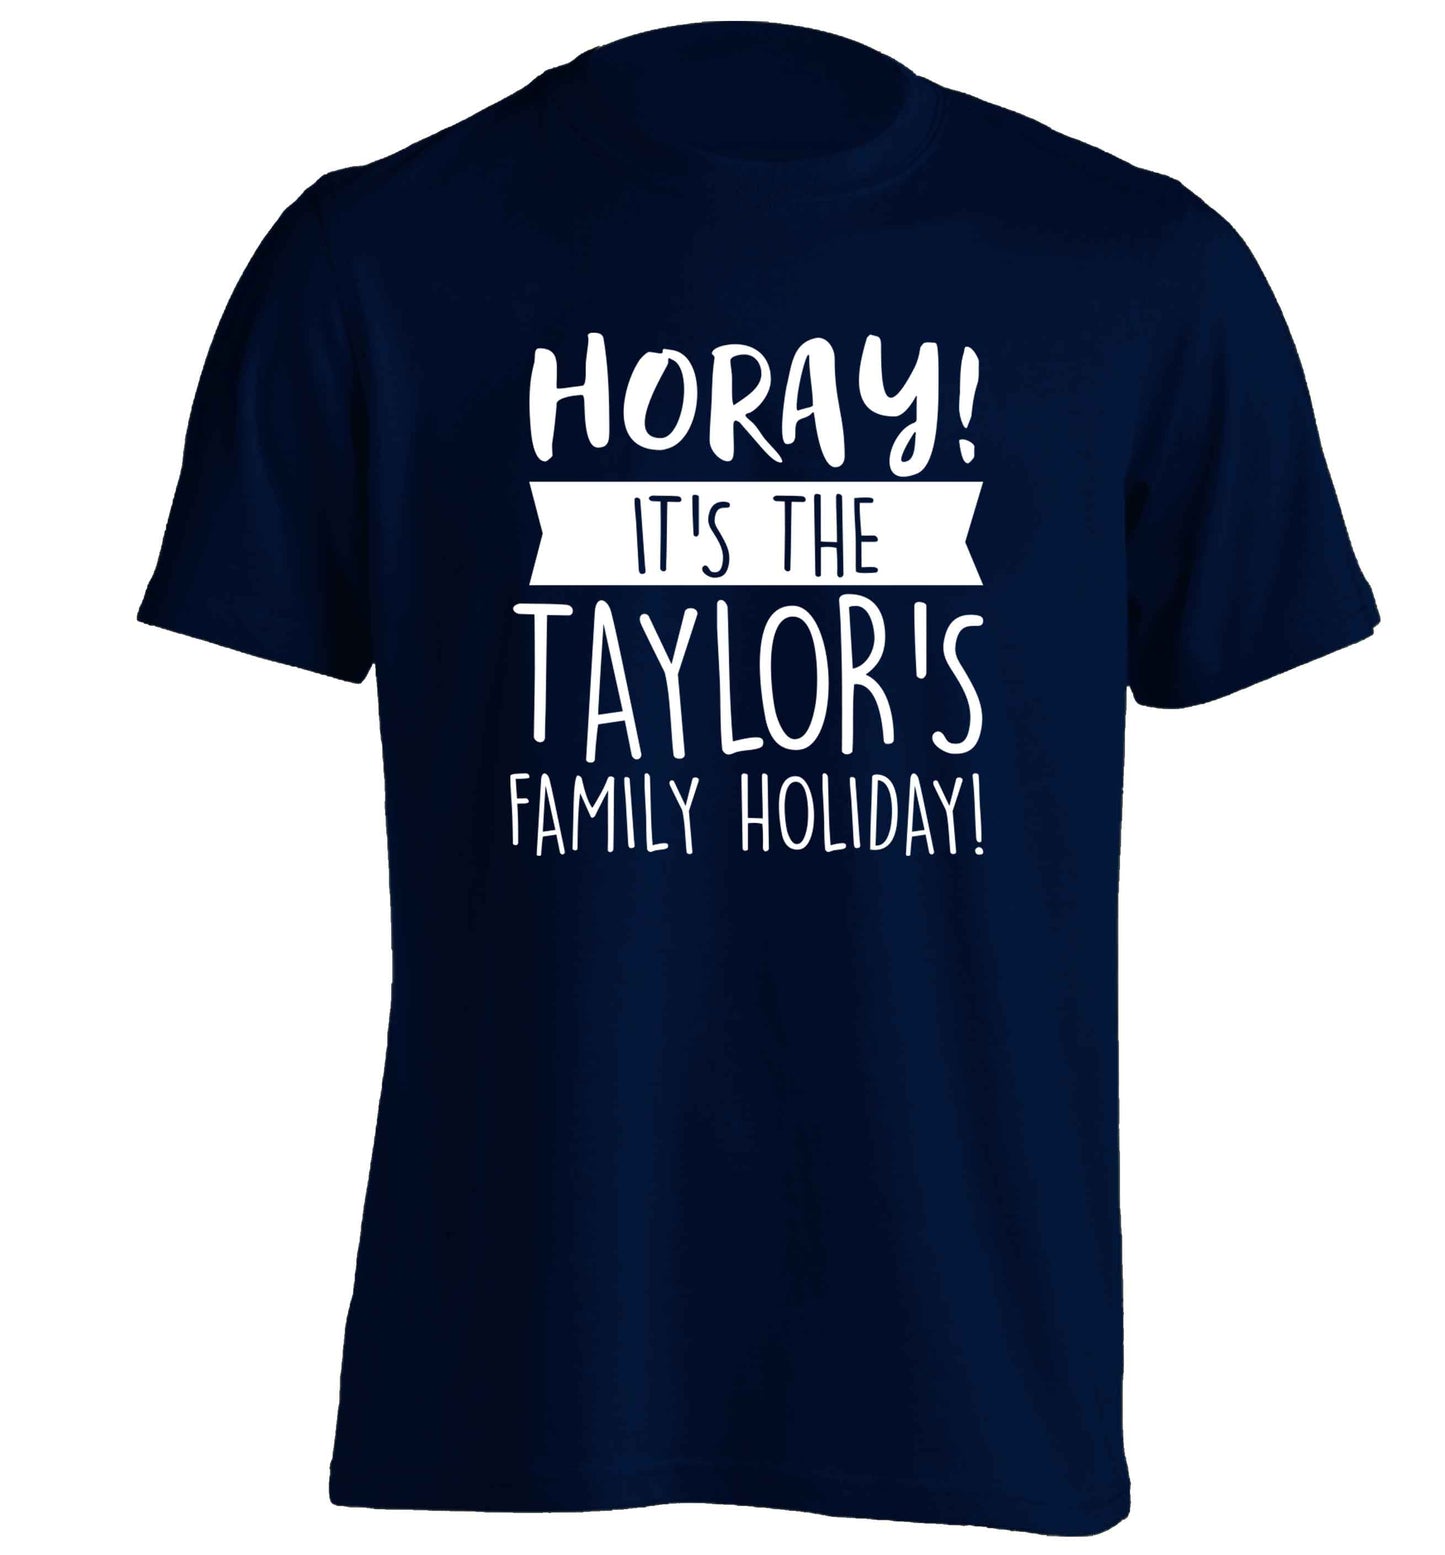 Horay it's the Taylor's family holiday! personalised item adults unisex navy Tshirt 2XL